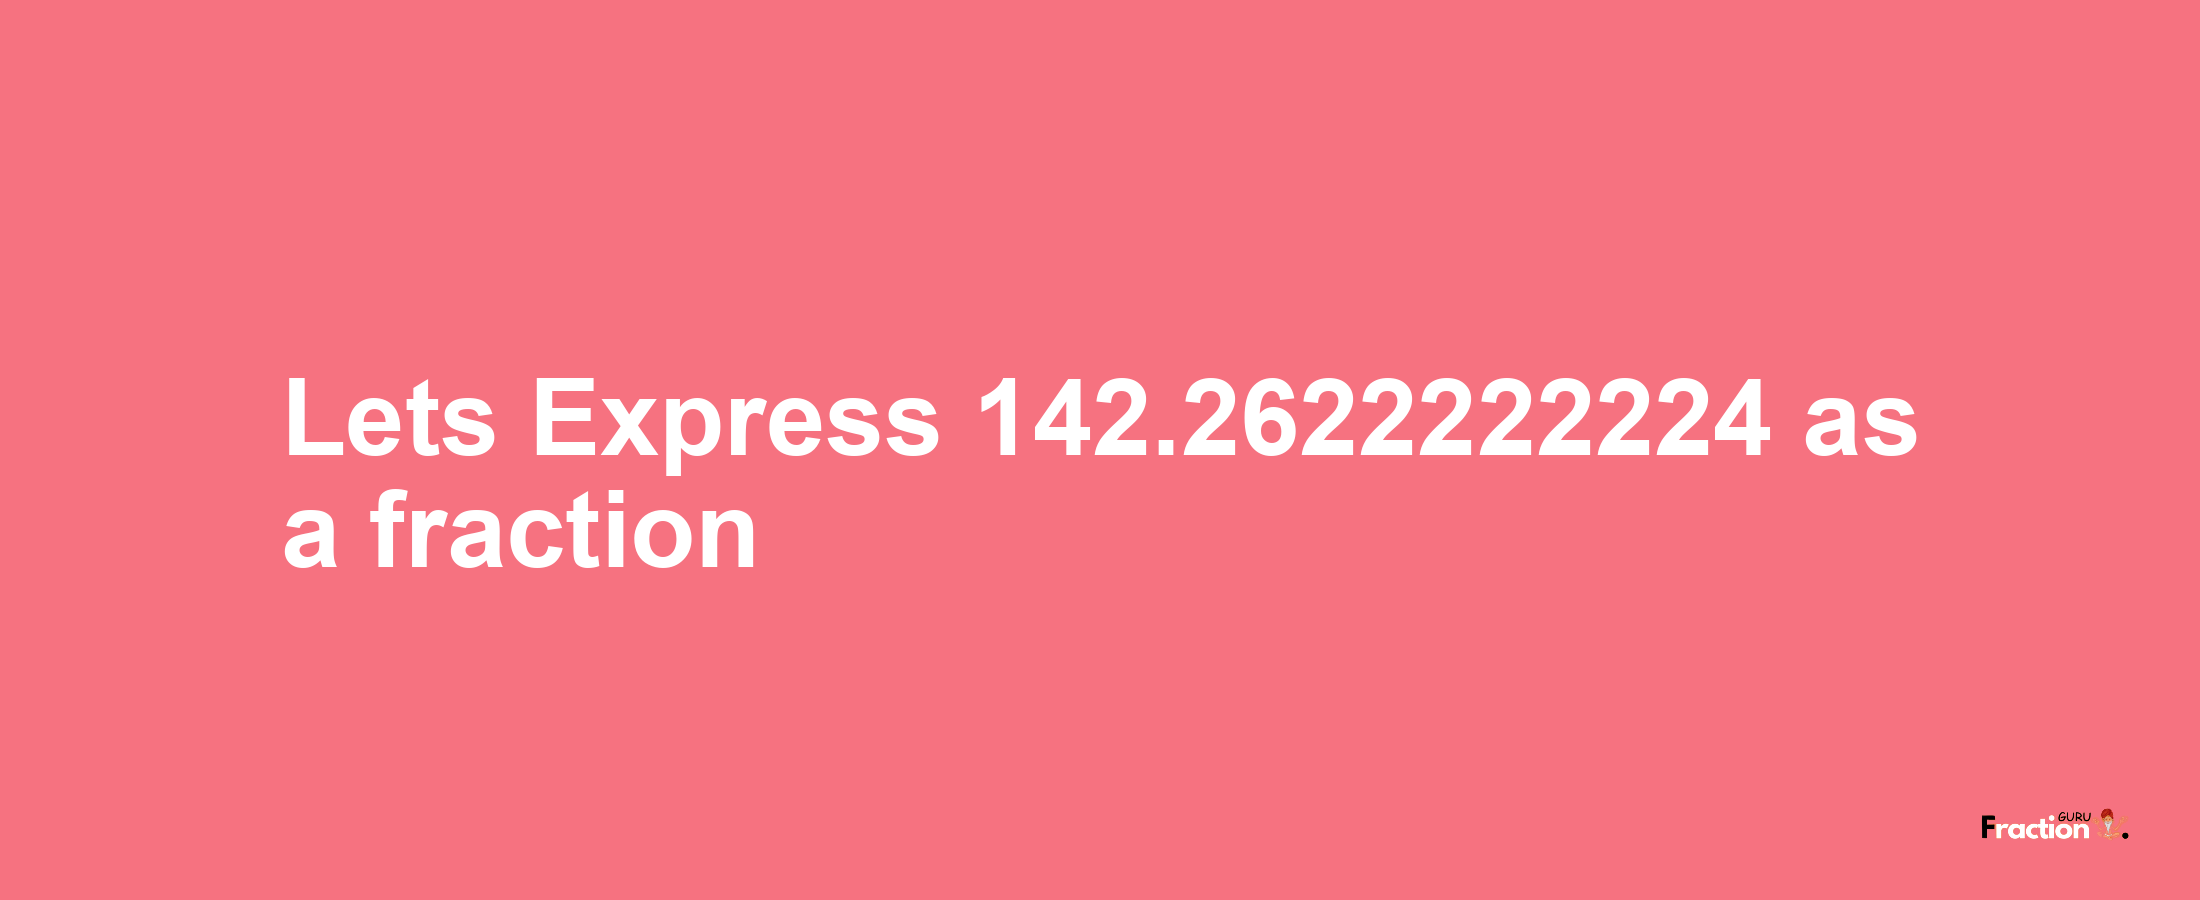 Lets Express 142.2622222224 as afraction